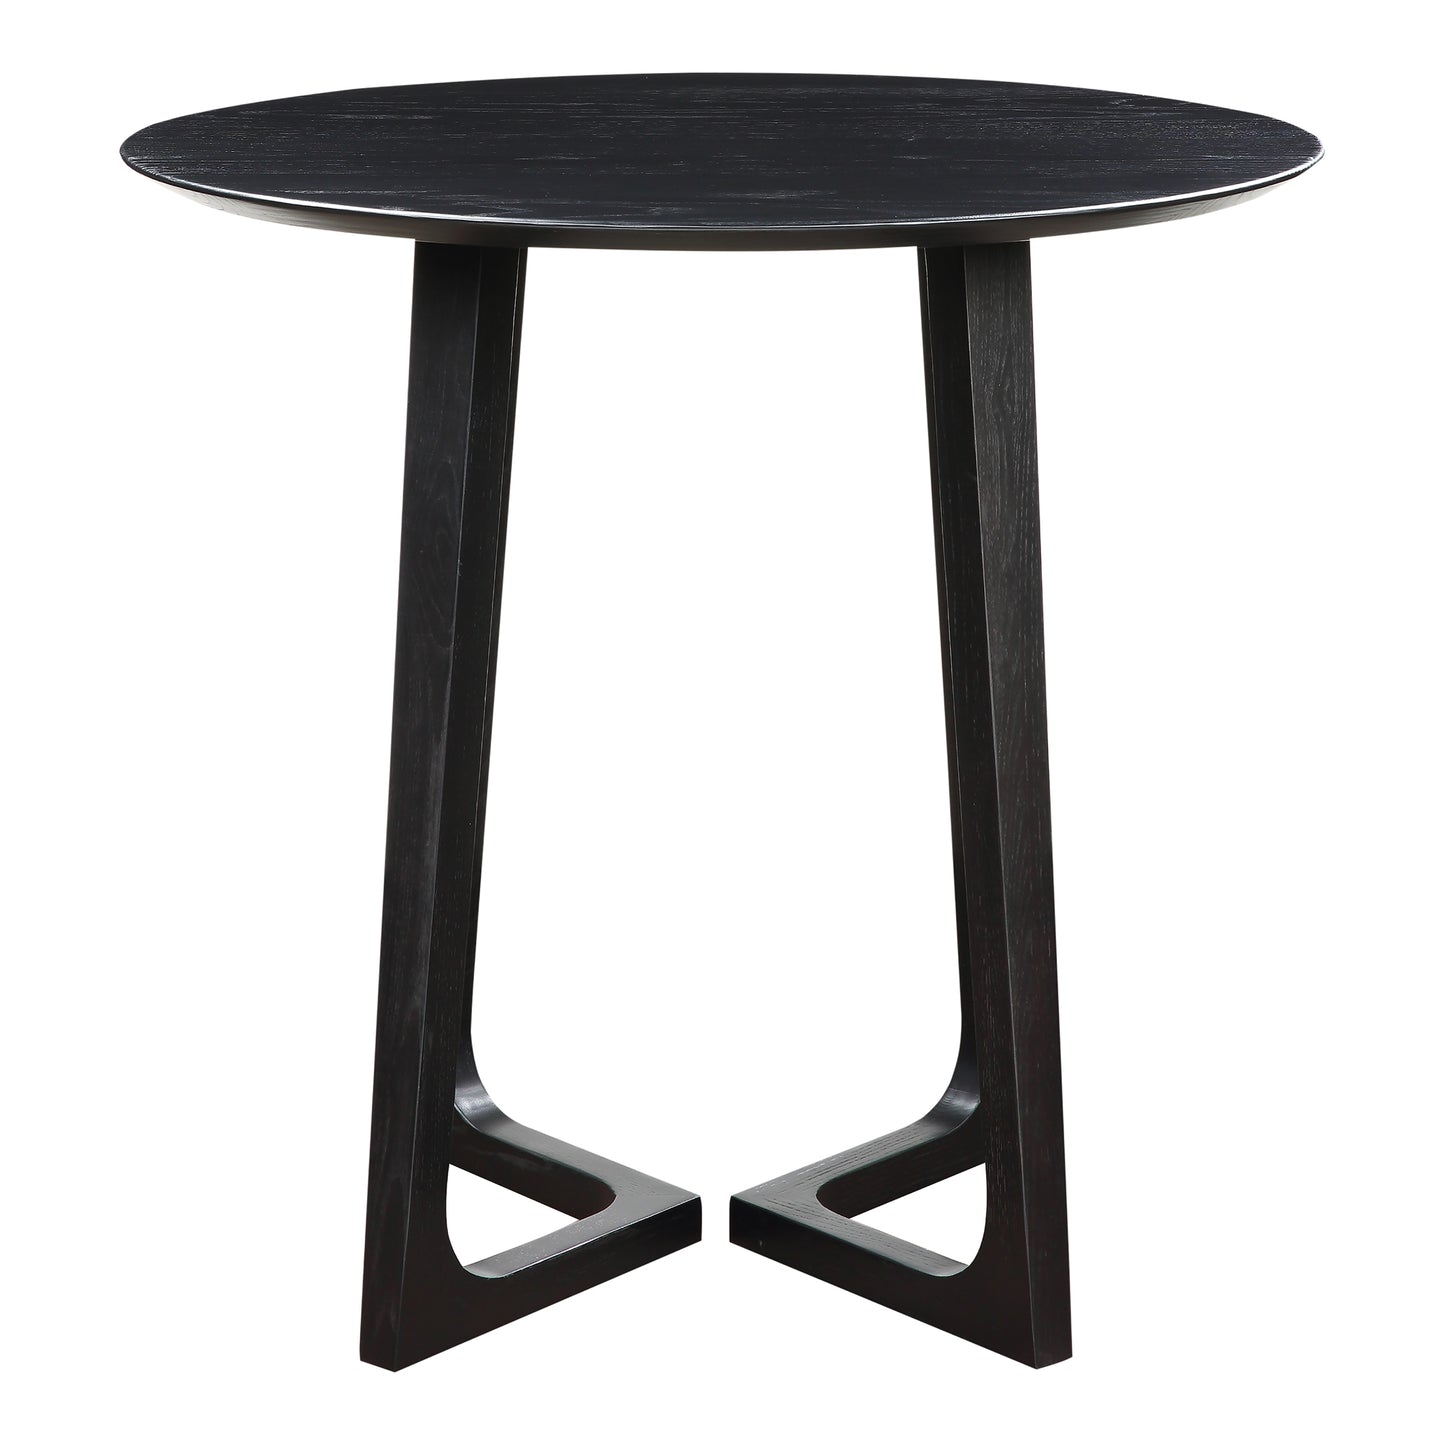 Godenza Counter Table Black Counter Table Moe's    Four Hands, Mid Century Modern Furniture, Old Bones Furniture Company, Old Bones Co, Modern Mid Century, Designer Furniture, Furniture Sale, Warehouse Furniture Sale, Godenza Counter Table Black Sale, https://www.oldbonesco.com/